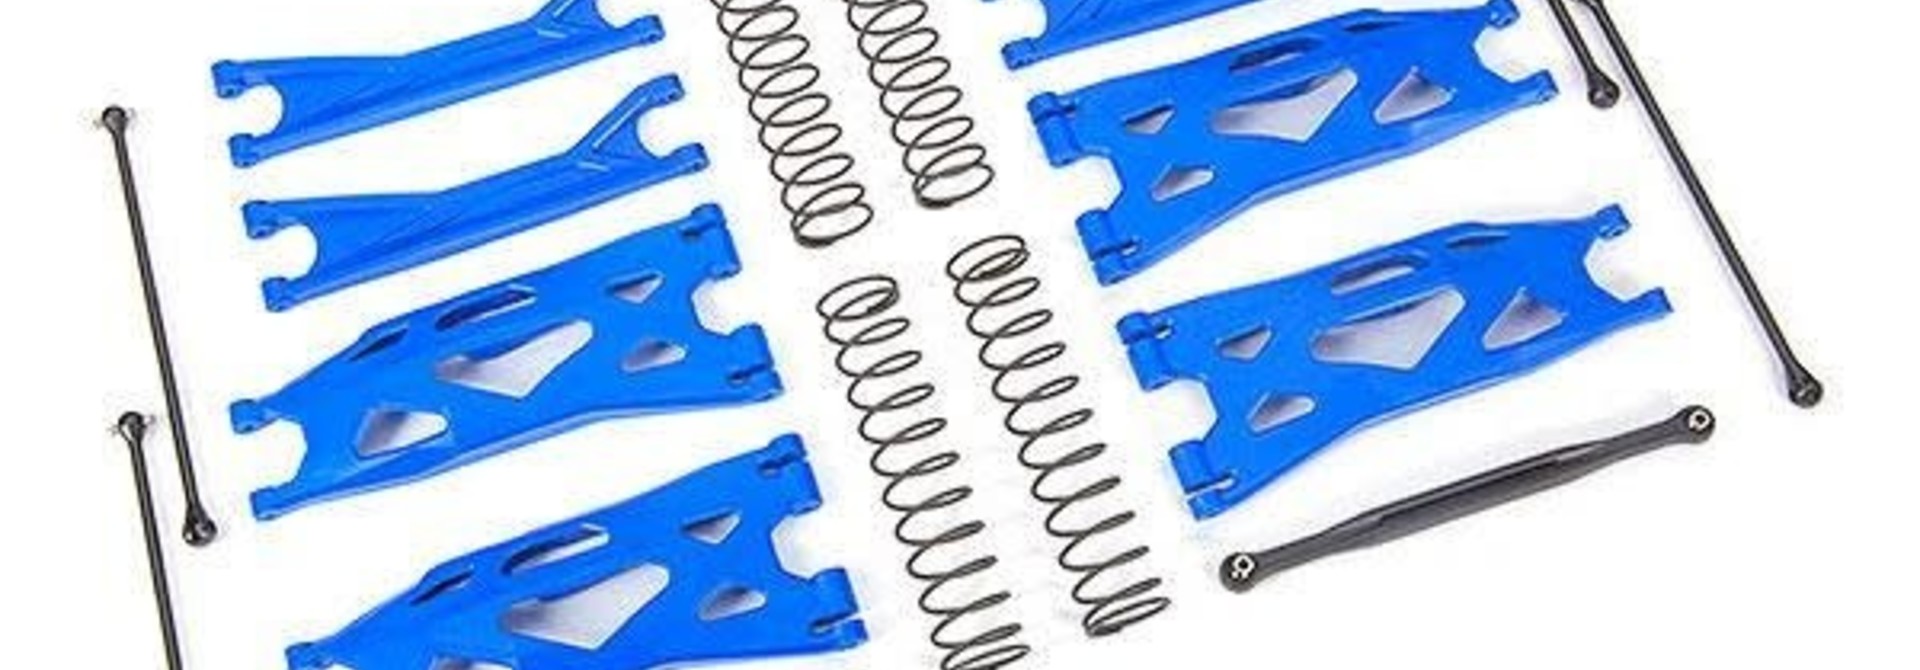 Suspension kit, X-Maxx WideMaxx, BLUE (includes front & rear suspension arms, front toe links, driveshafts, shock springs)